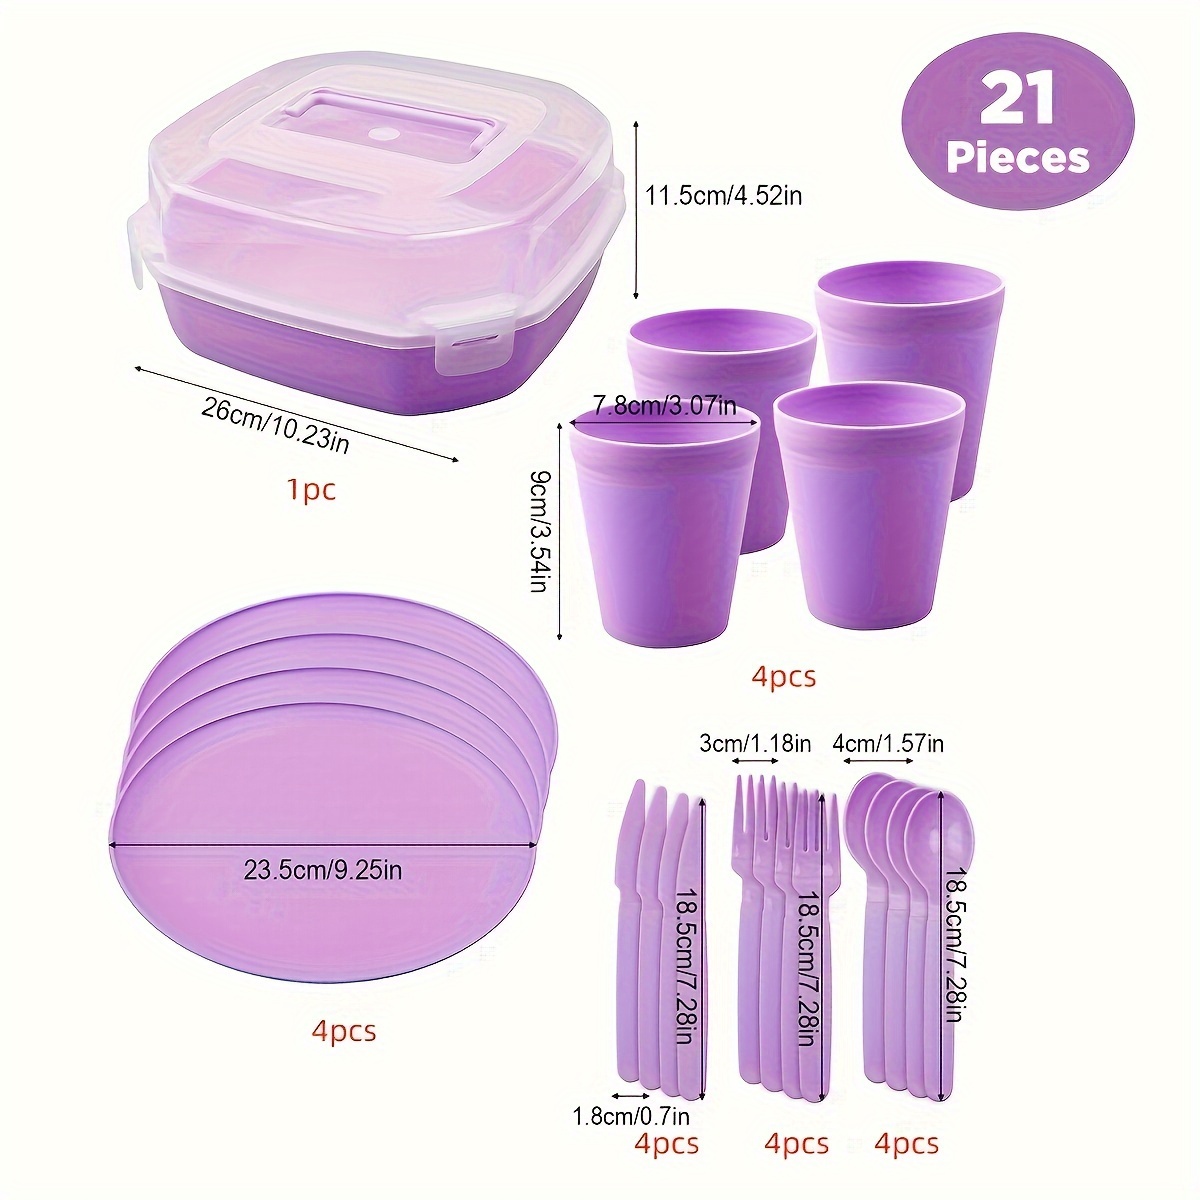 21pcs Picnic Tableware Set, Include Knives, Forks, Spoons, Cups, Plates, Cutlery Storage Box, Multi-functional Transparent Dinnerware, For Picnic Camp